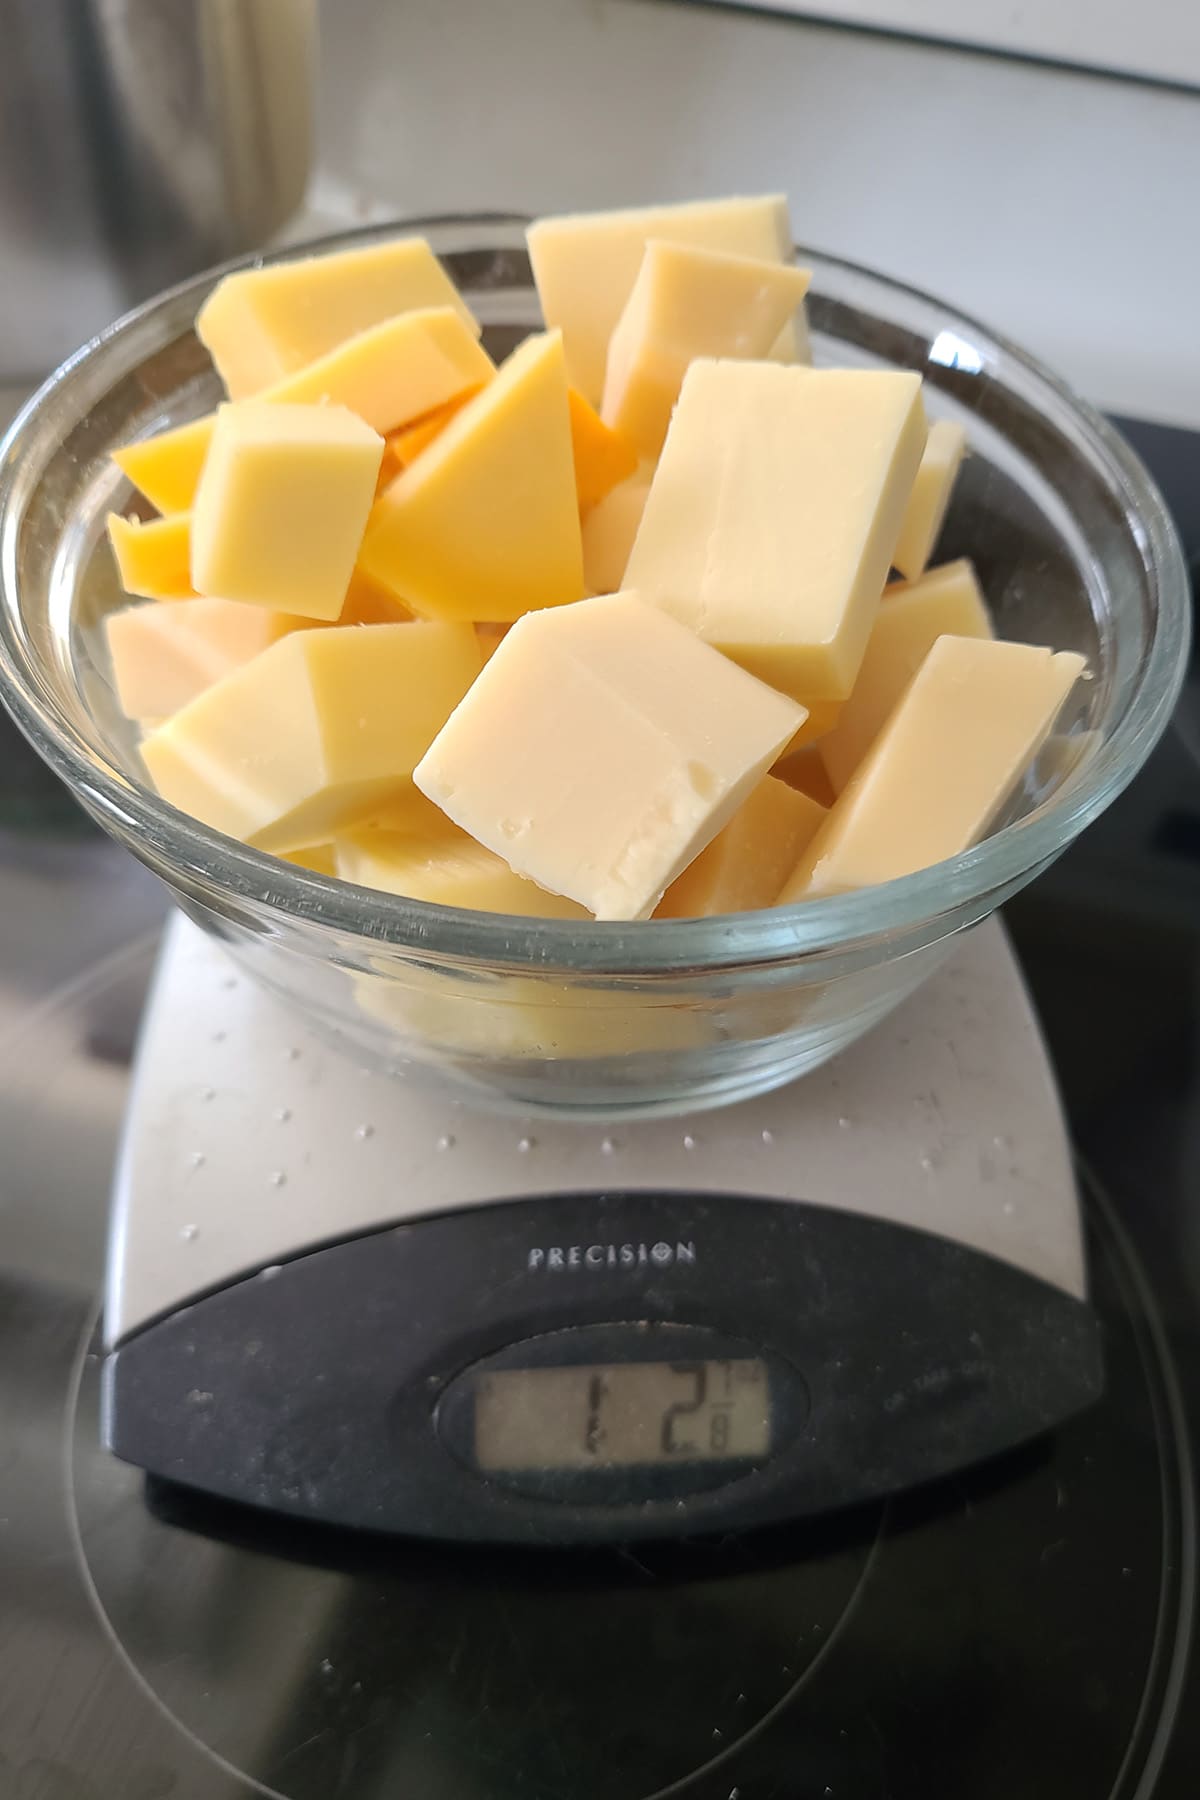 A glass bowl of cheese chunks on a scale. The scale reads 1 lb 2 oz.